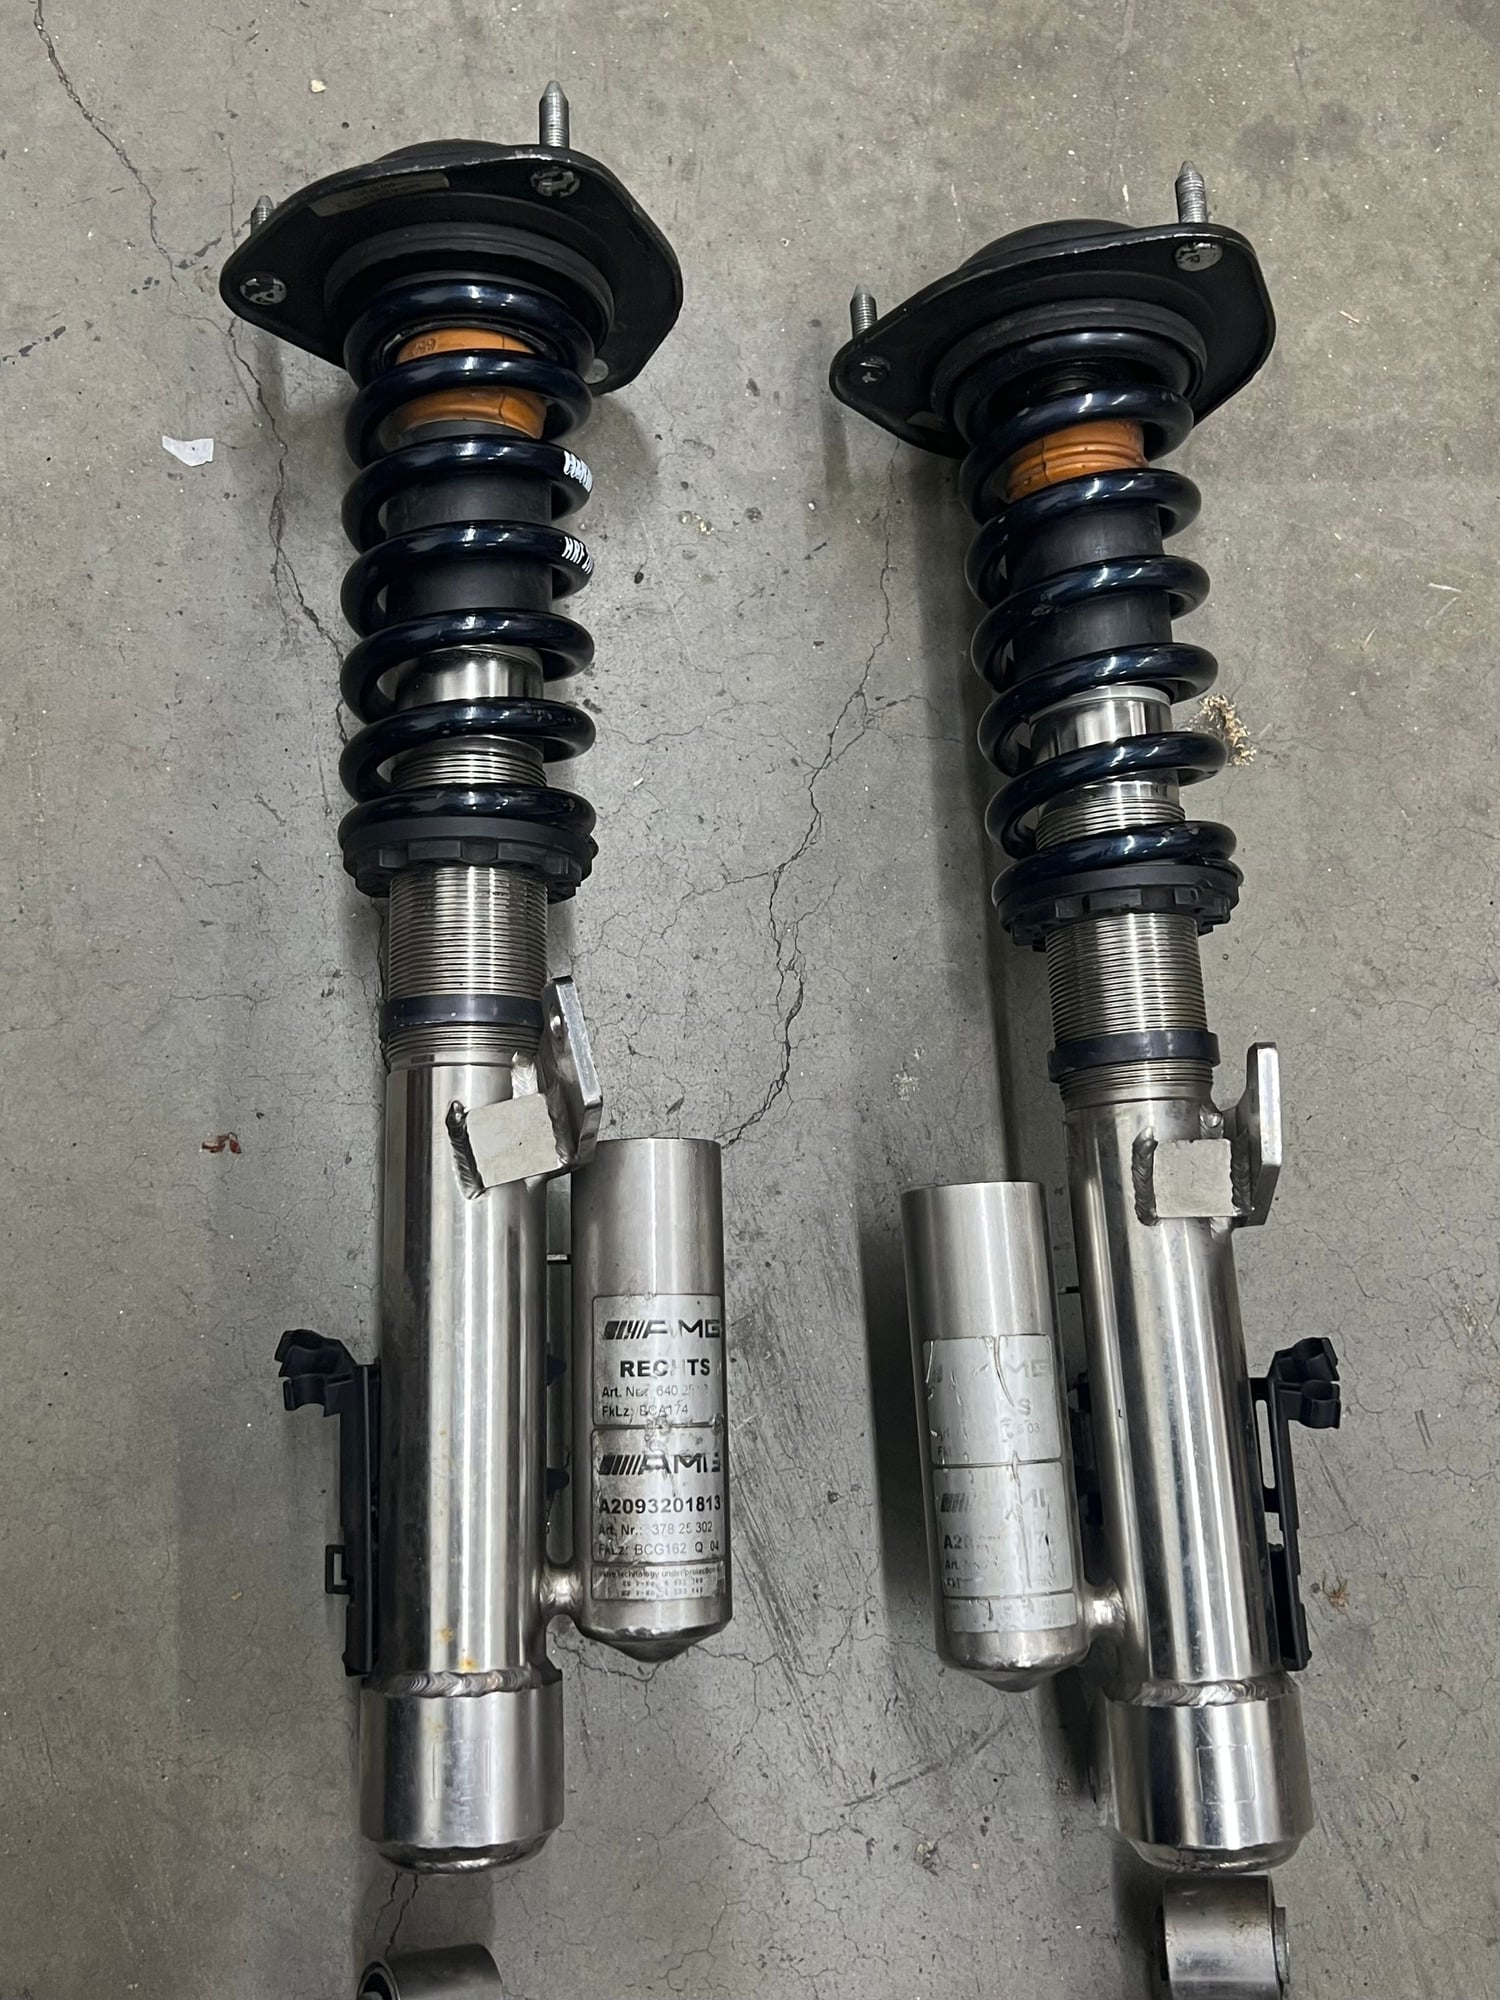 Steering/Suspension - For Sale: CLK Black Series suspension (Coil overs) - Used - 0  All Models - Los Angeles, CA 91311, United States